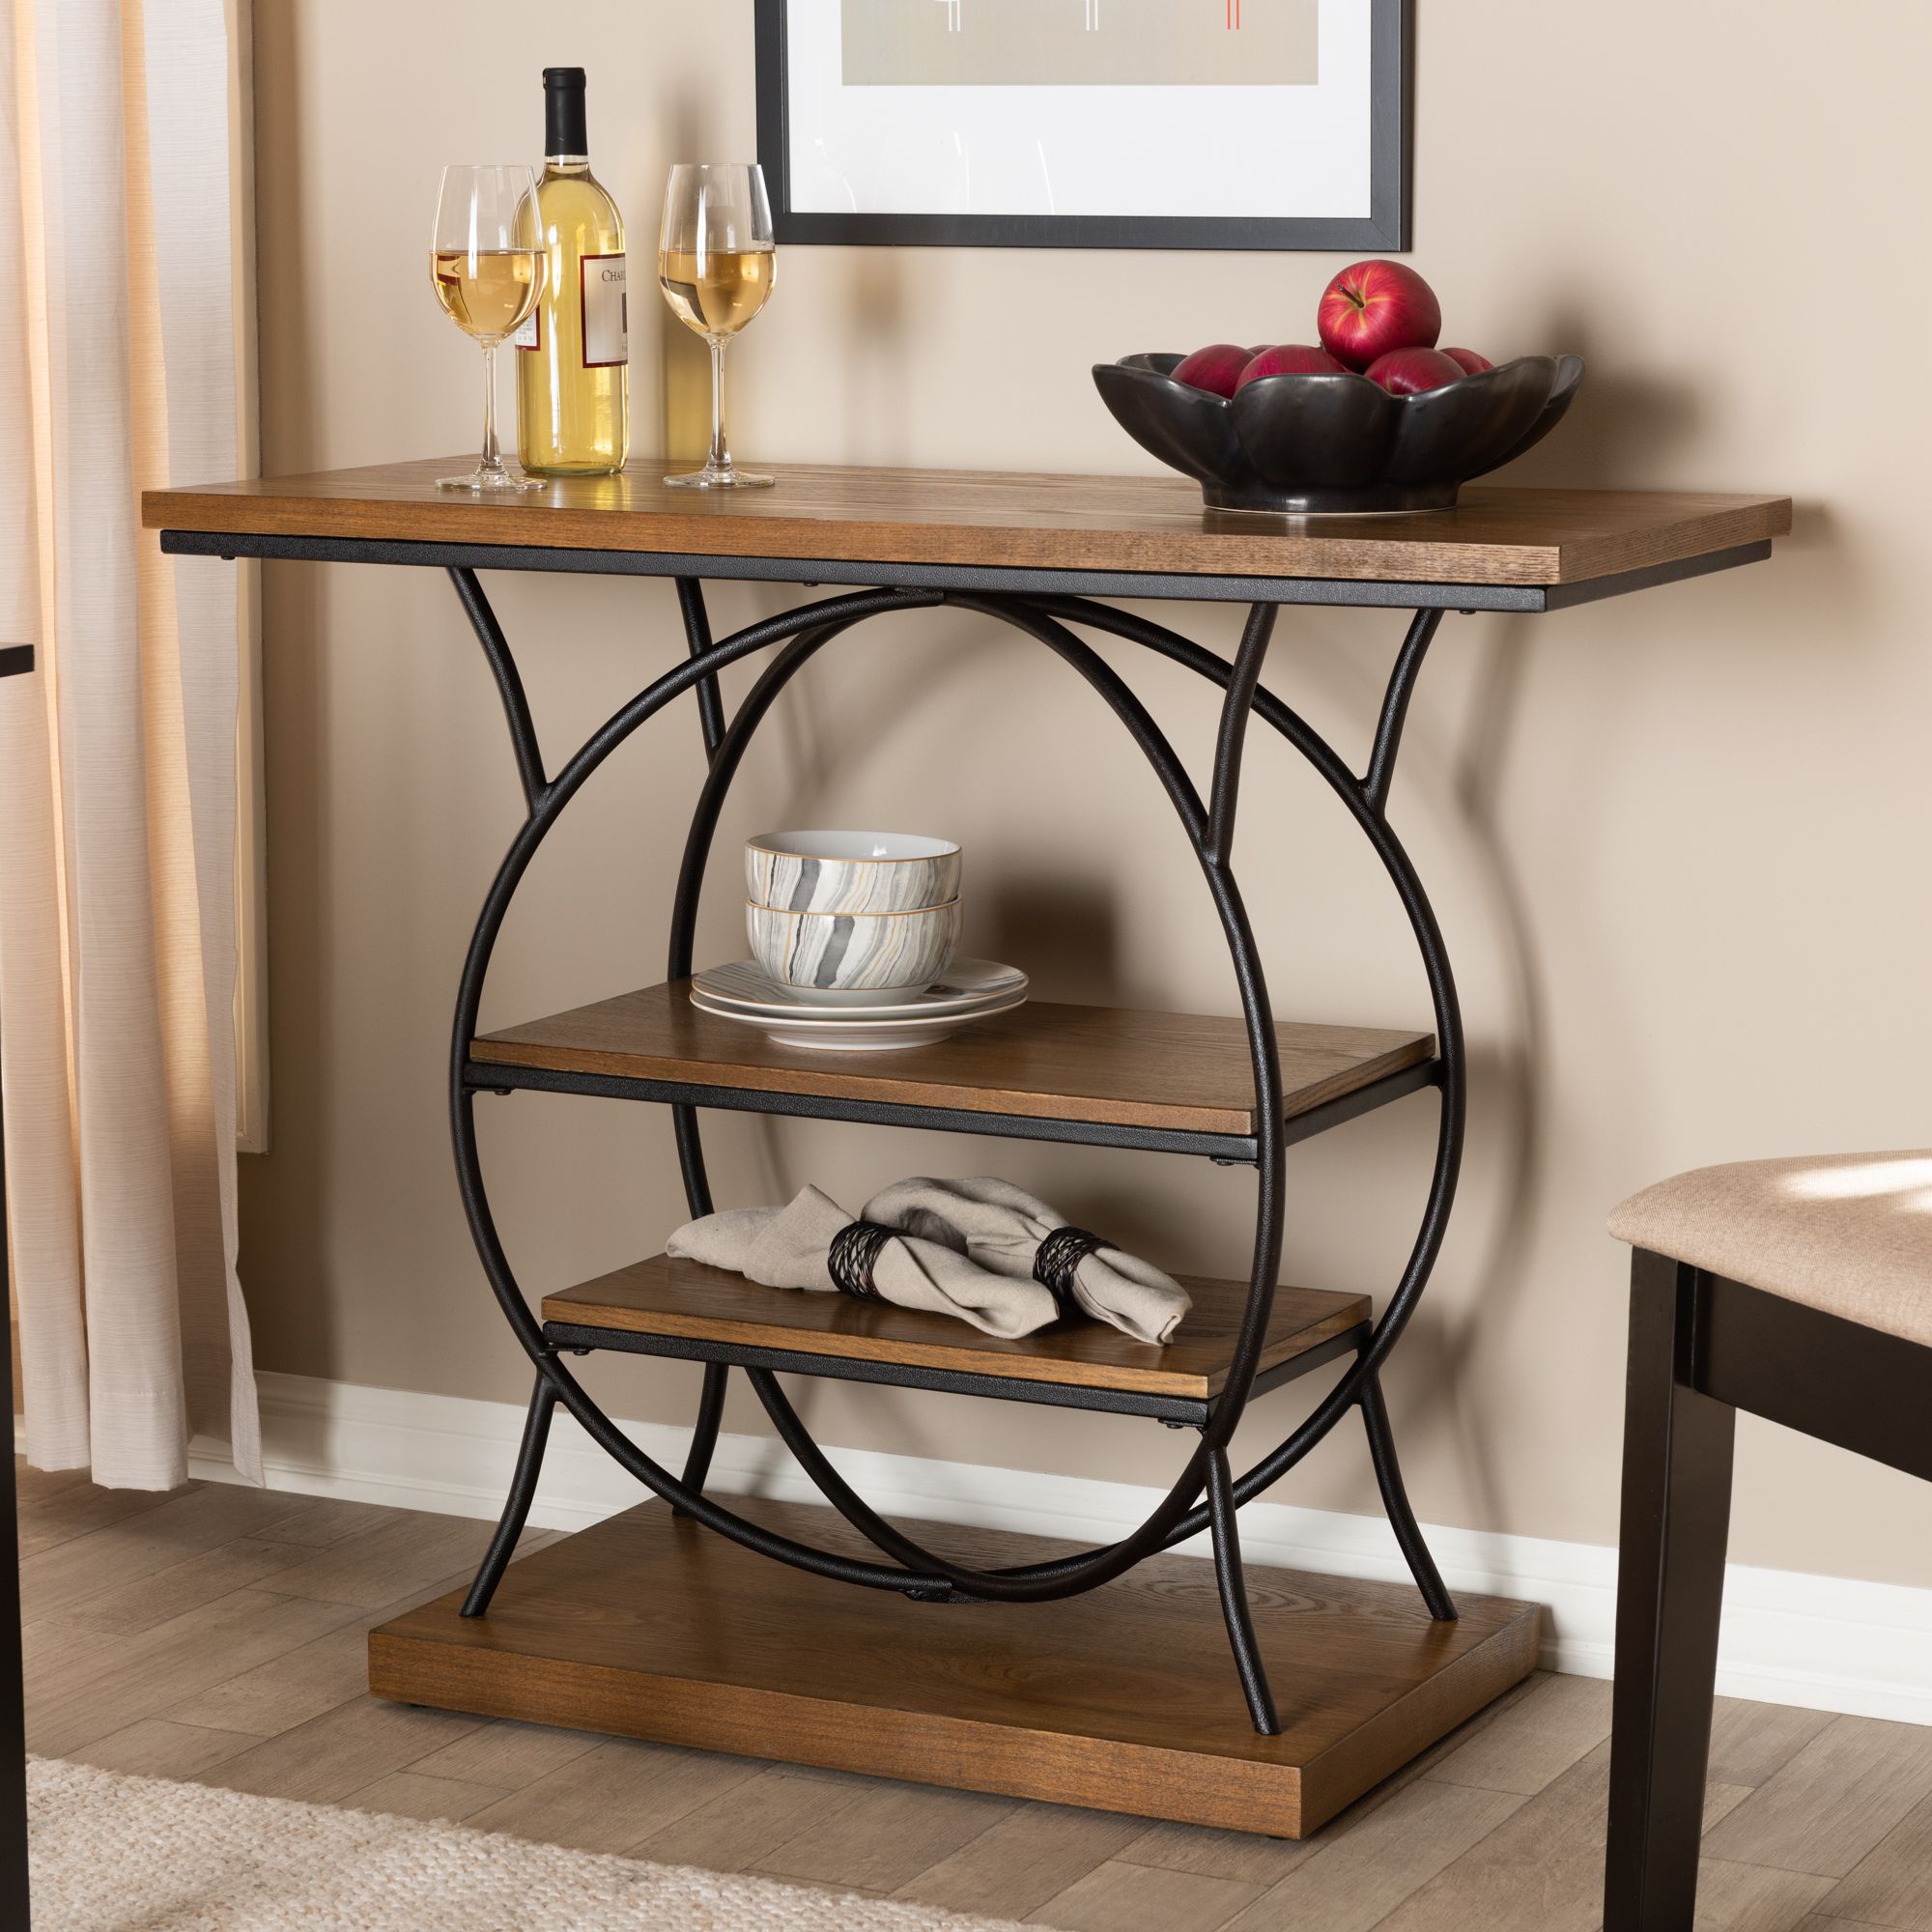 Baxton Studio Lavelle Vintage Rustic Industrial Style Inside Antique Console Tables (View 18 of 20)